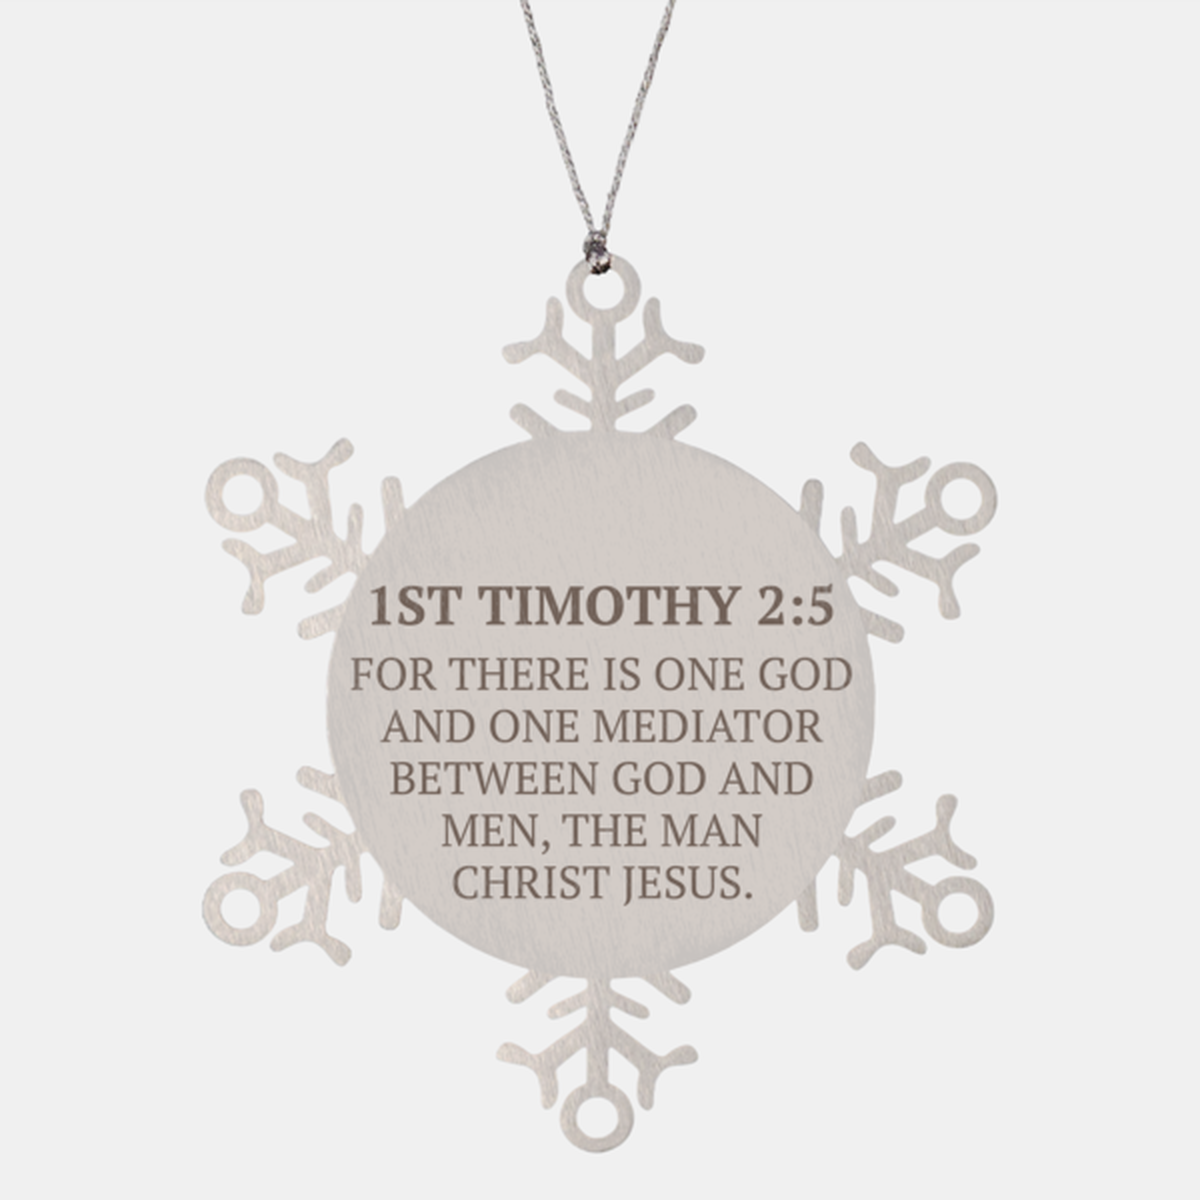 Christian Ornaments For Christmas Tree, For There Is One God And One Mediator, Religious Christmas Decorations, Scripture Ornaments Gifts, Bible Verse Ornament